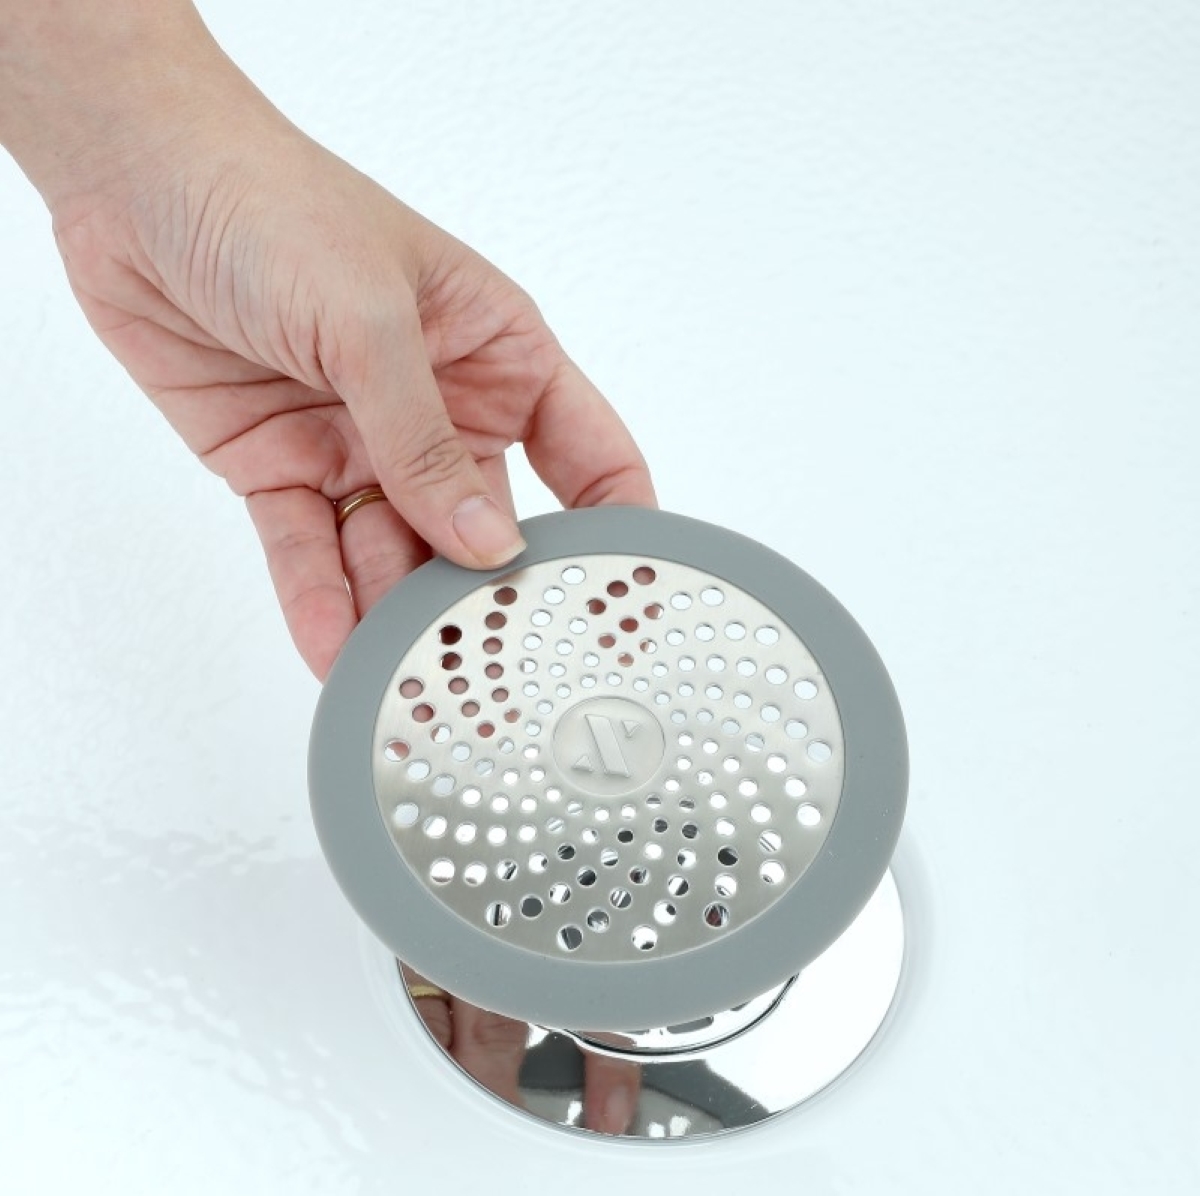 20 Things to Fix Around the House for Under $20 - shower hair catcher